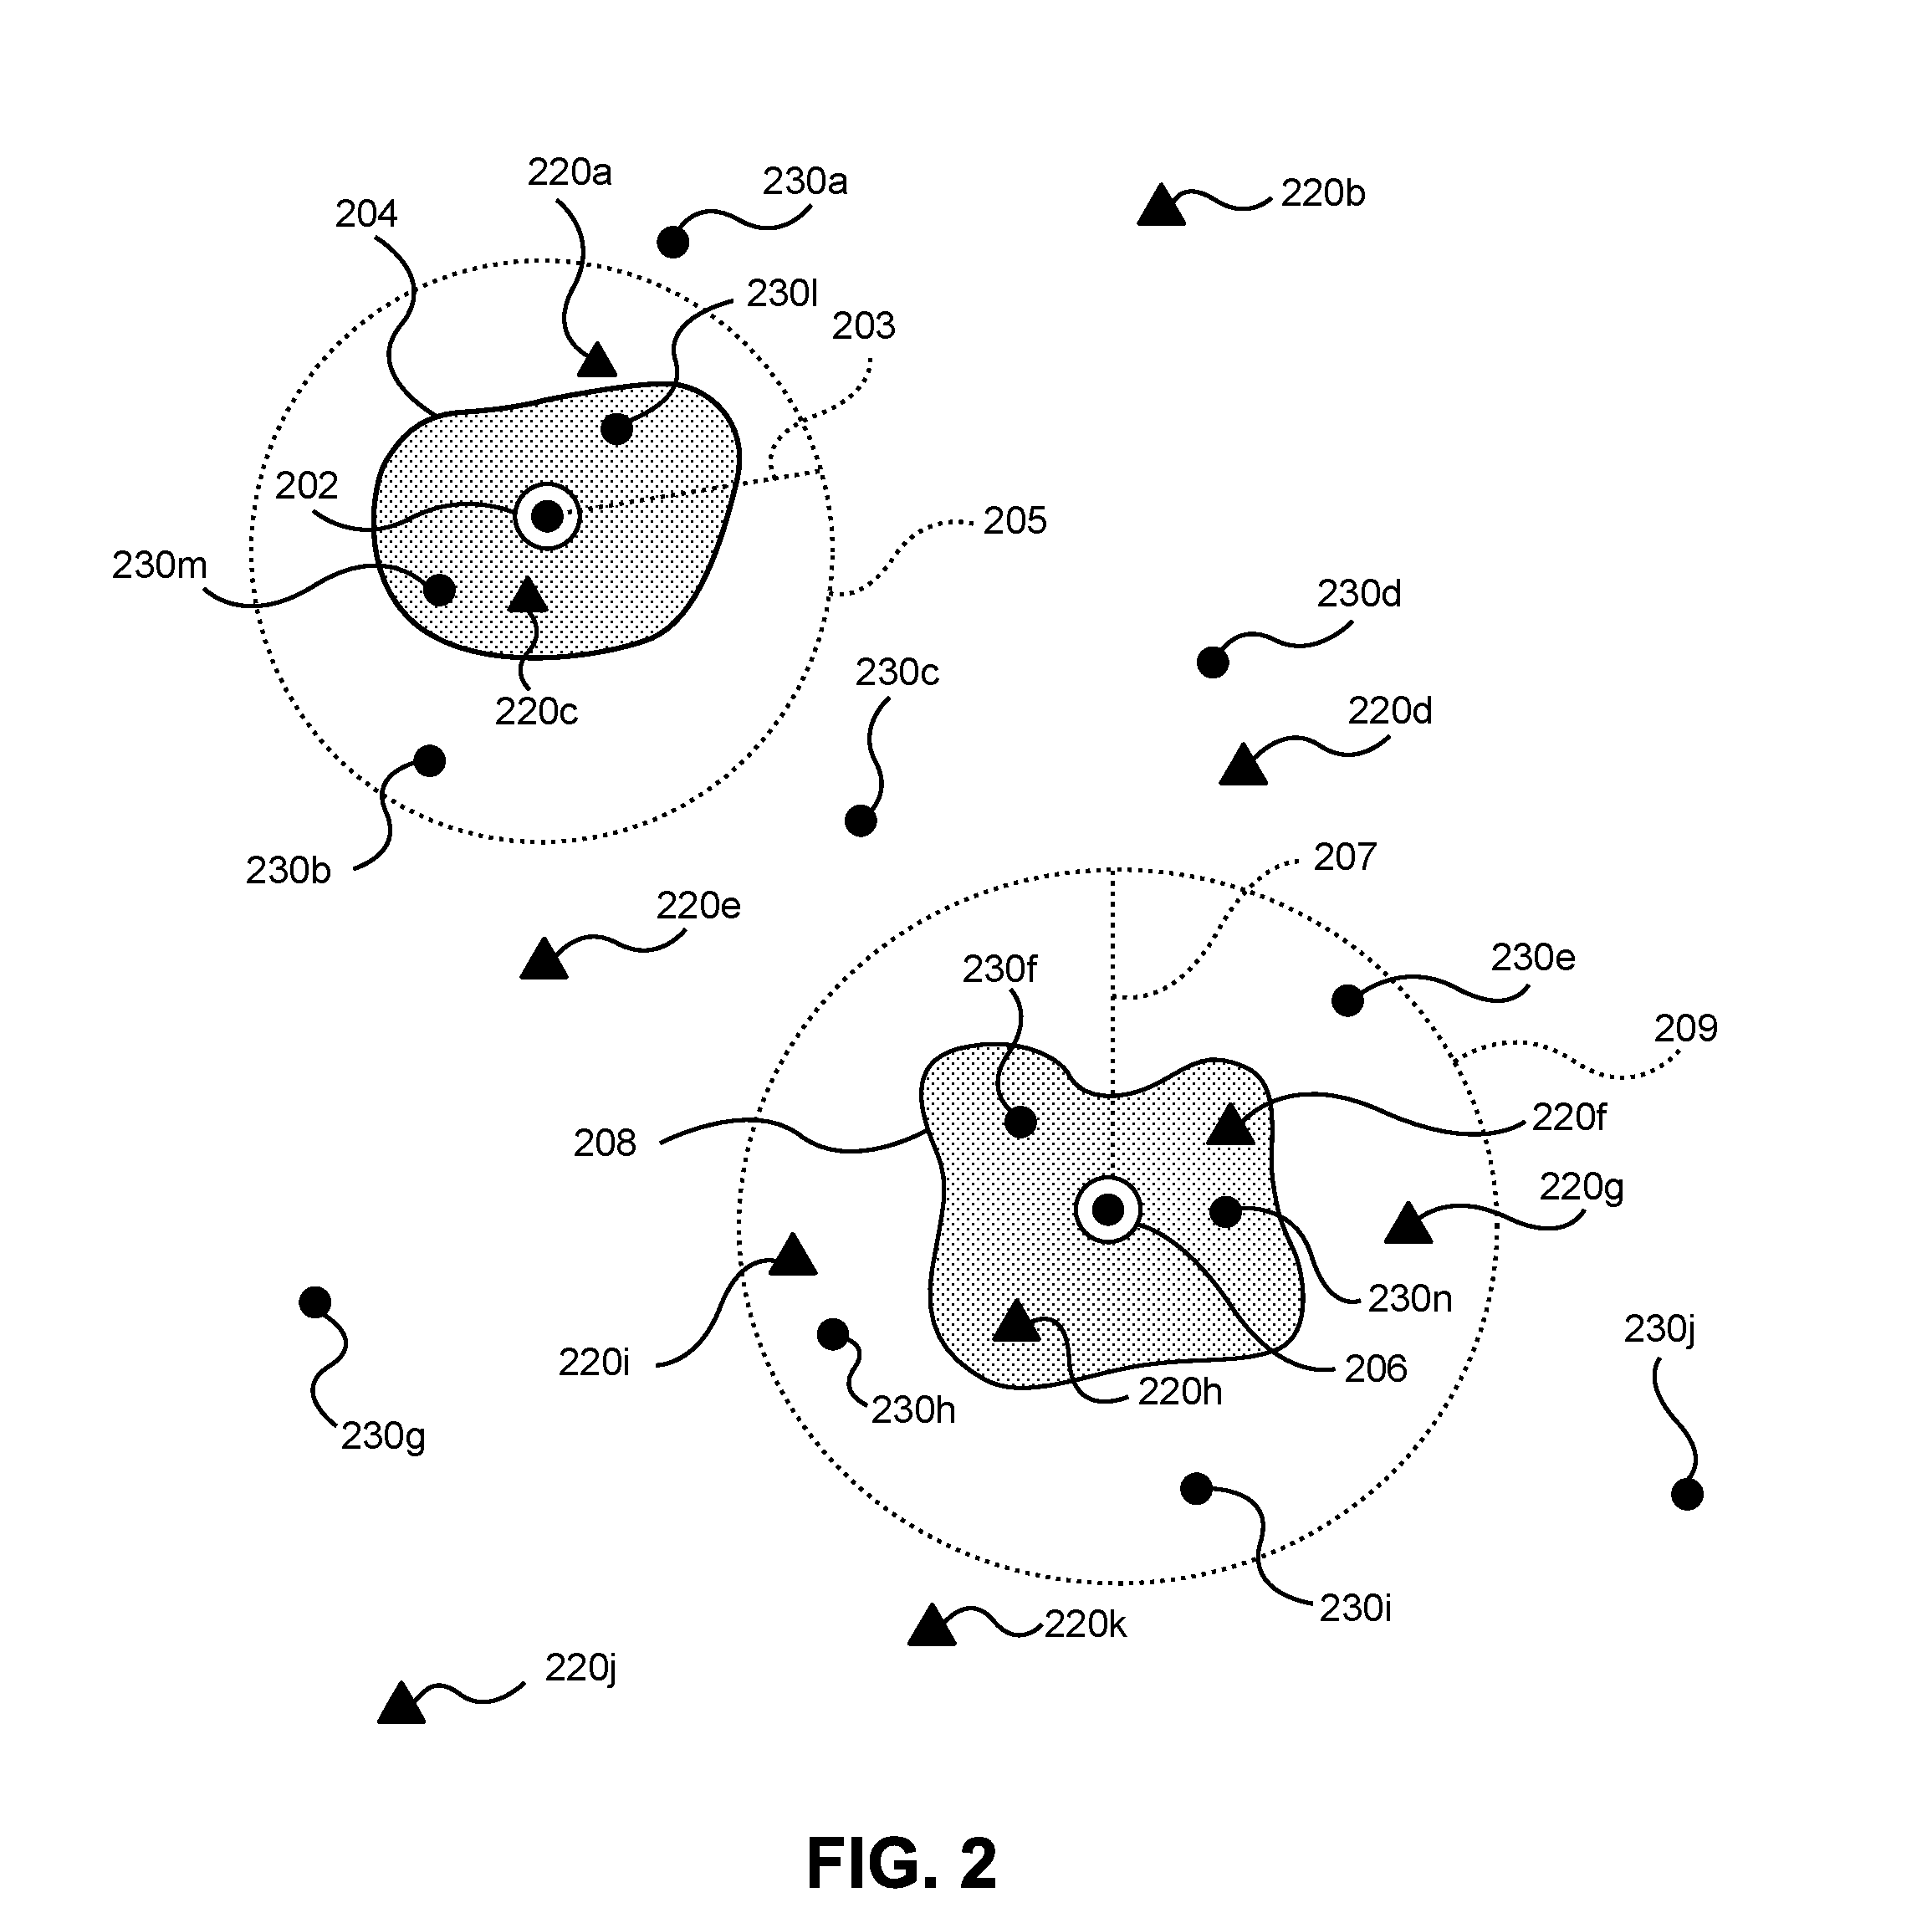 Systems and Methods for Allocating Networked Vehicle Resources in Priority Environments